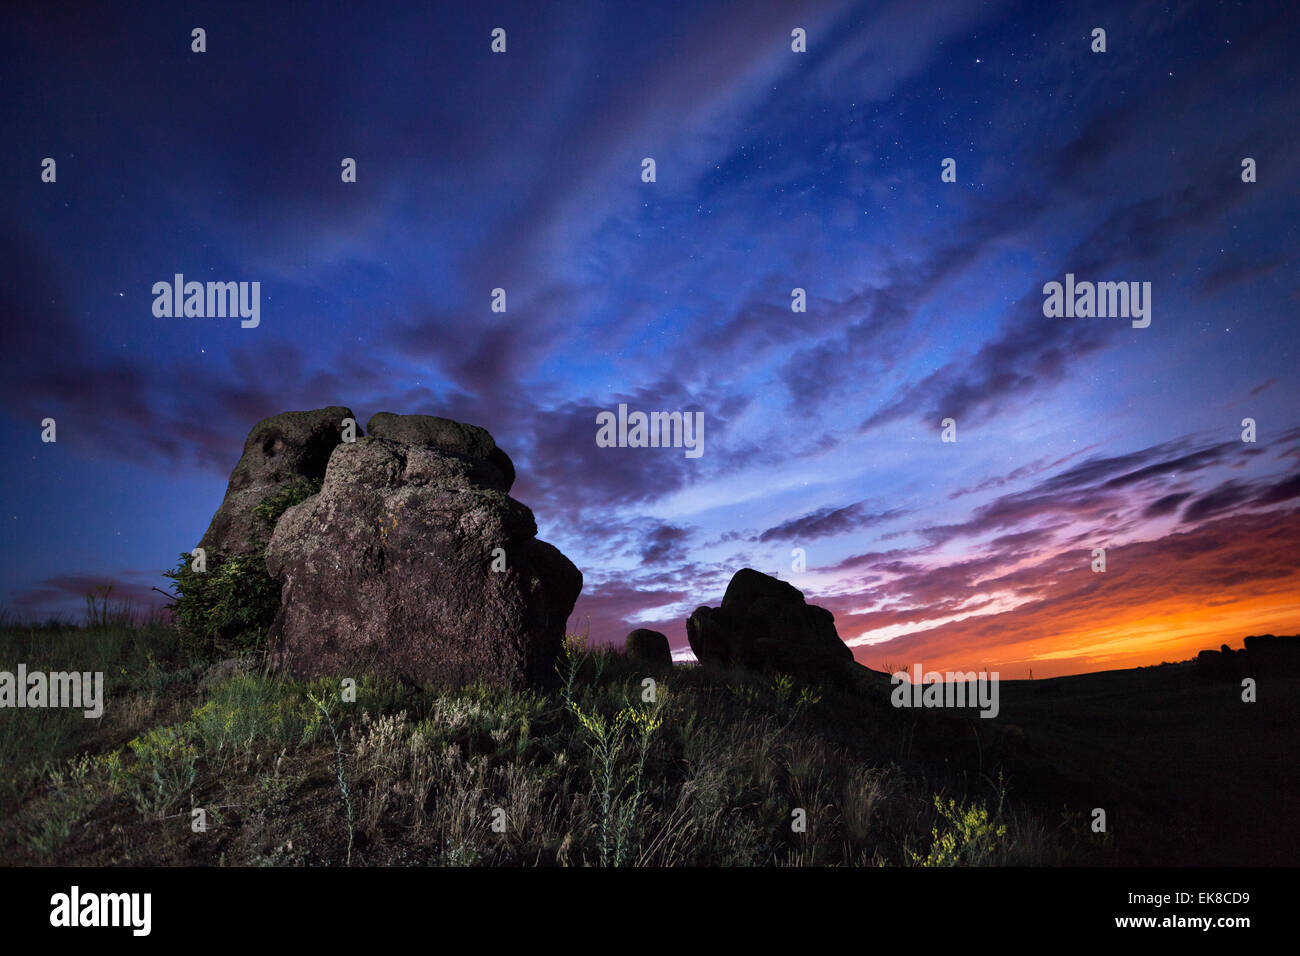 Beautiful summer night sky with stars and clouds. Rocks, plants and trail. Ukraine Stock Photo